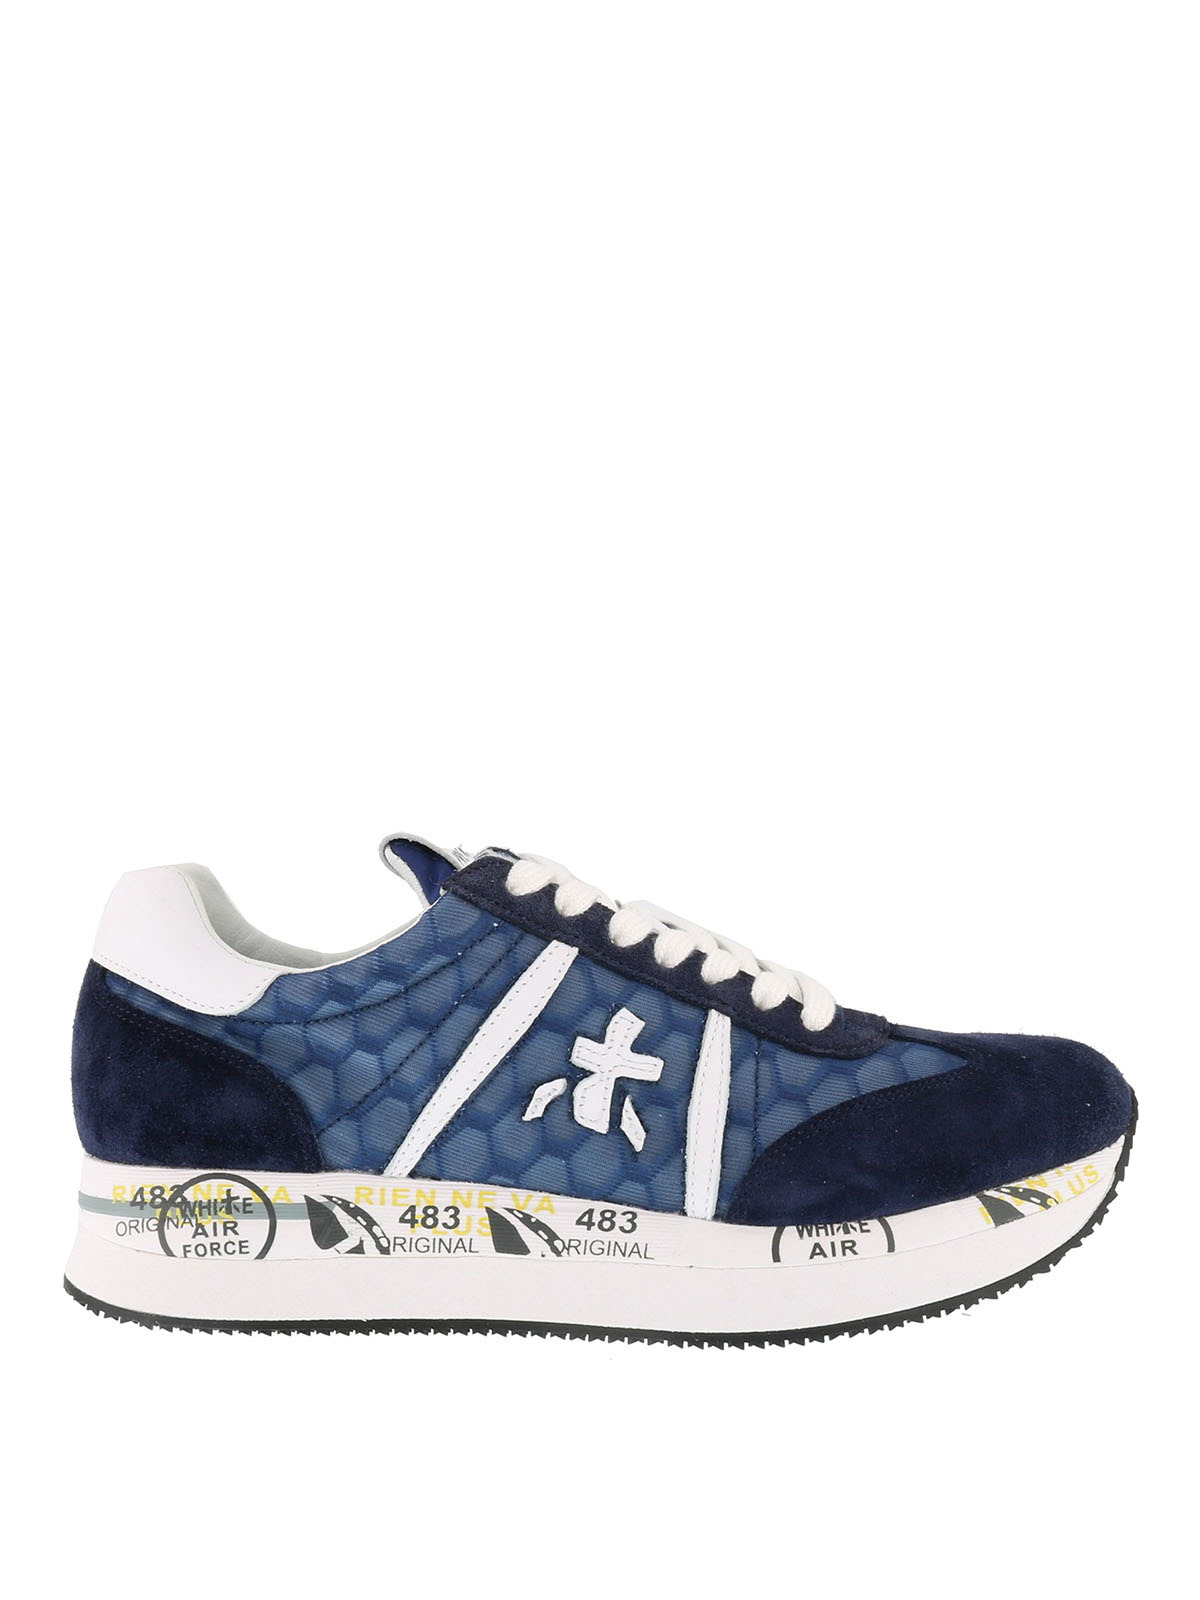 Trainers Premiata - Conny sneakers - CONNY5249 | Shop online at iKRIX